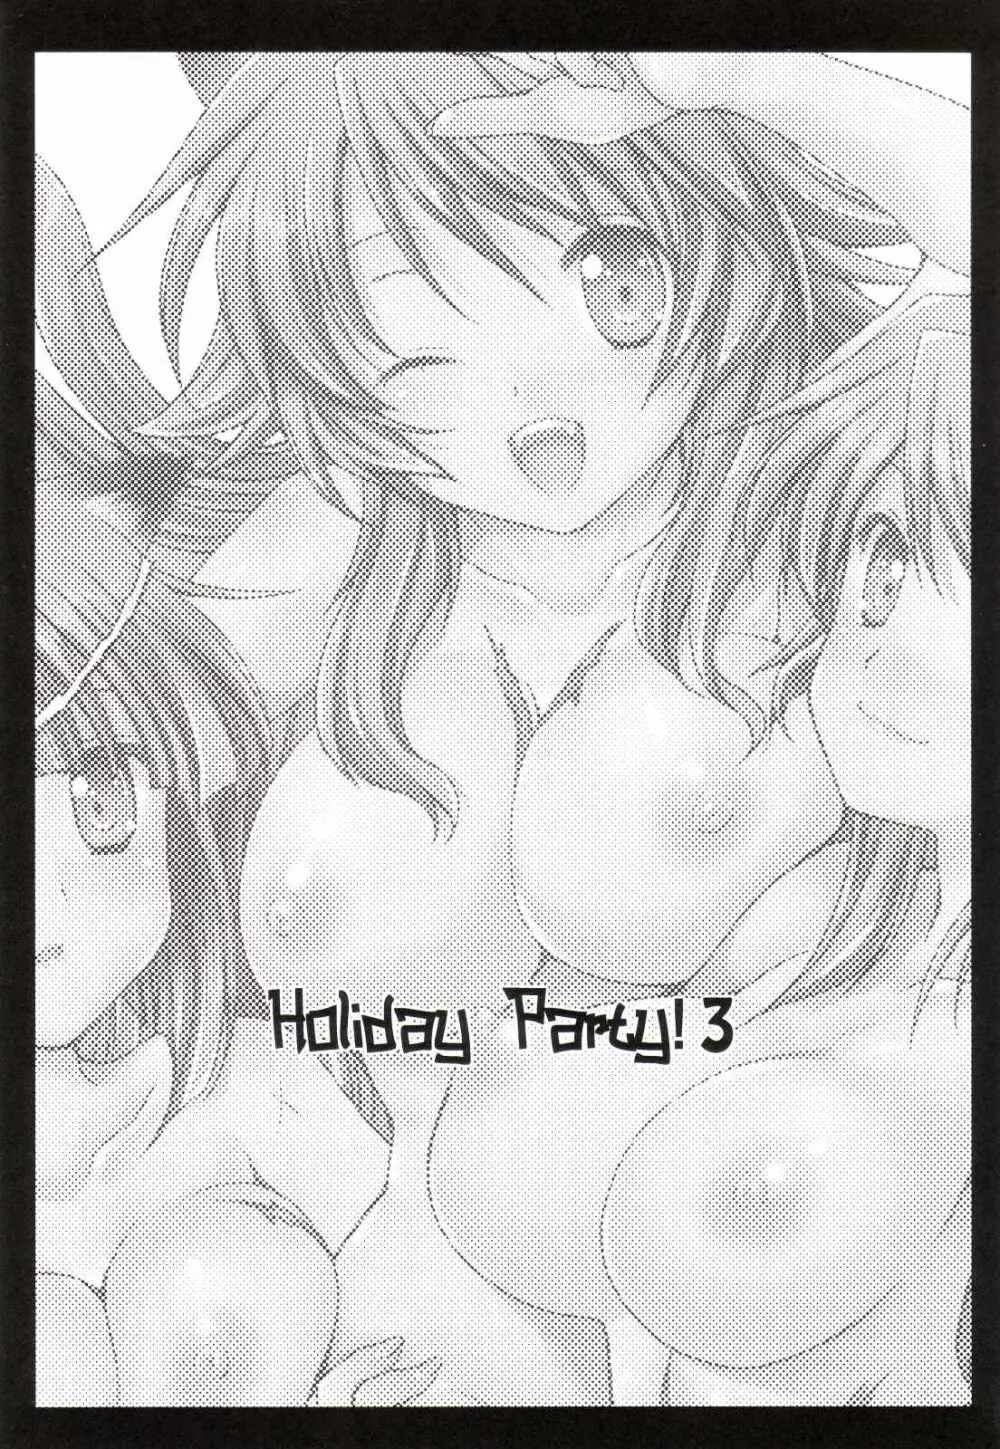 Holiday Party! 3 2ページ